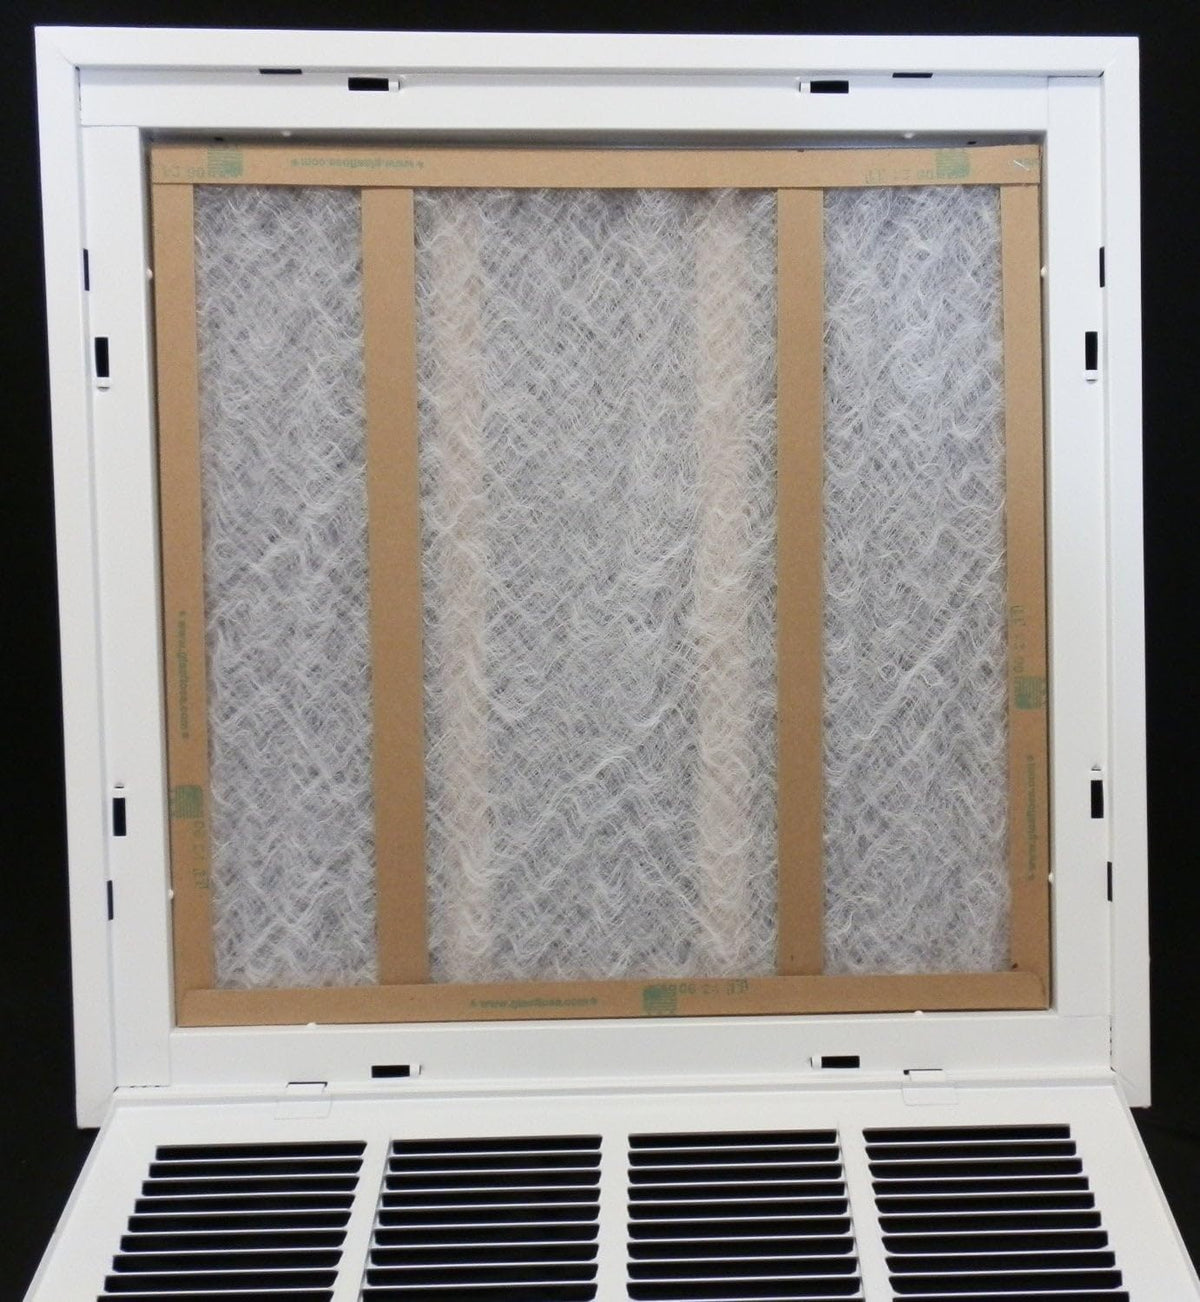 14&quot; X 20&quot; Steel Return Air Filter Grille for 1&quot; Filter - Fixed Hinged - [Outer Dimensions: 16 5/8&quot; X 22 5/8&quot;]